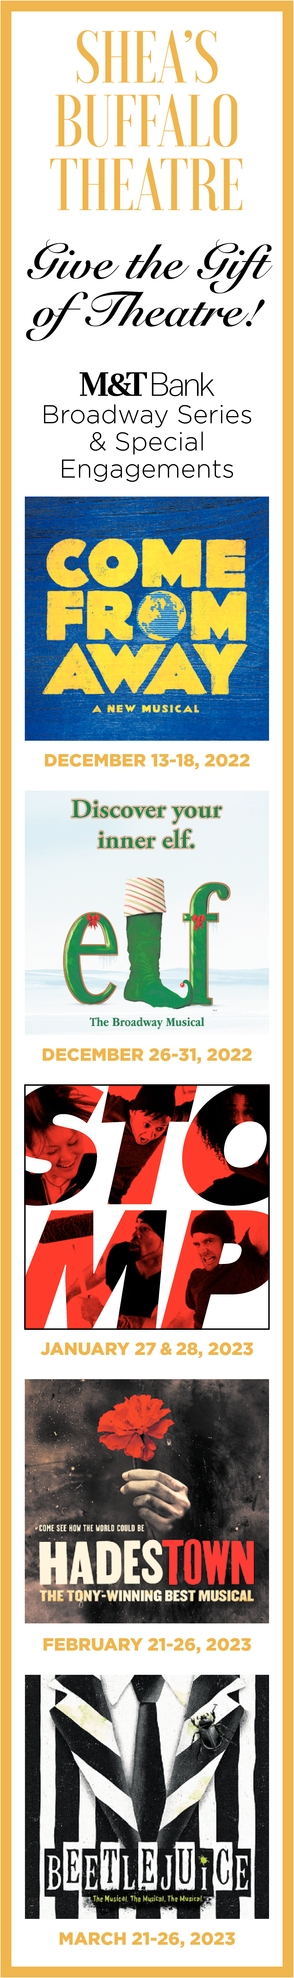 Give The Gift Of Theatre!